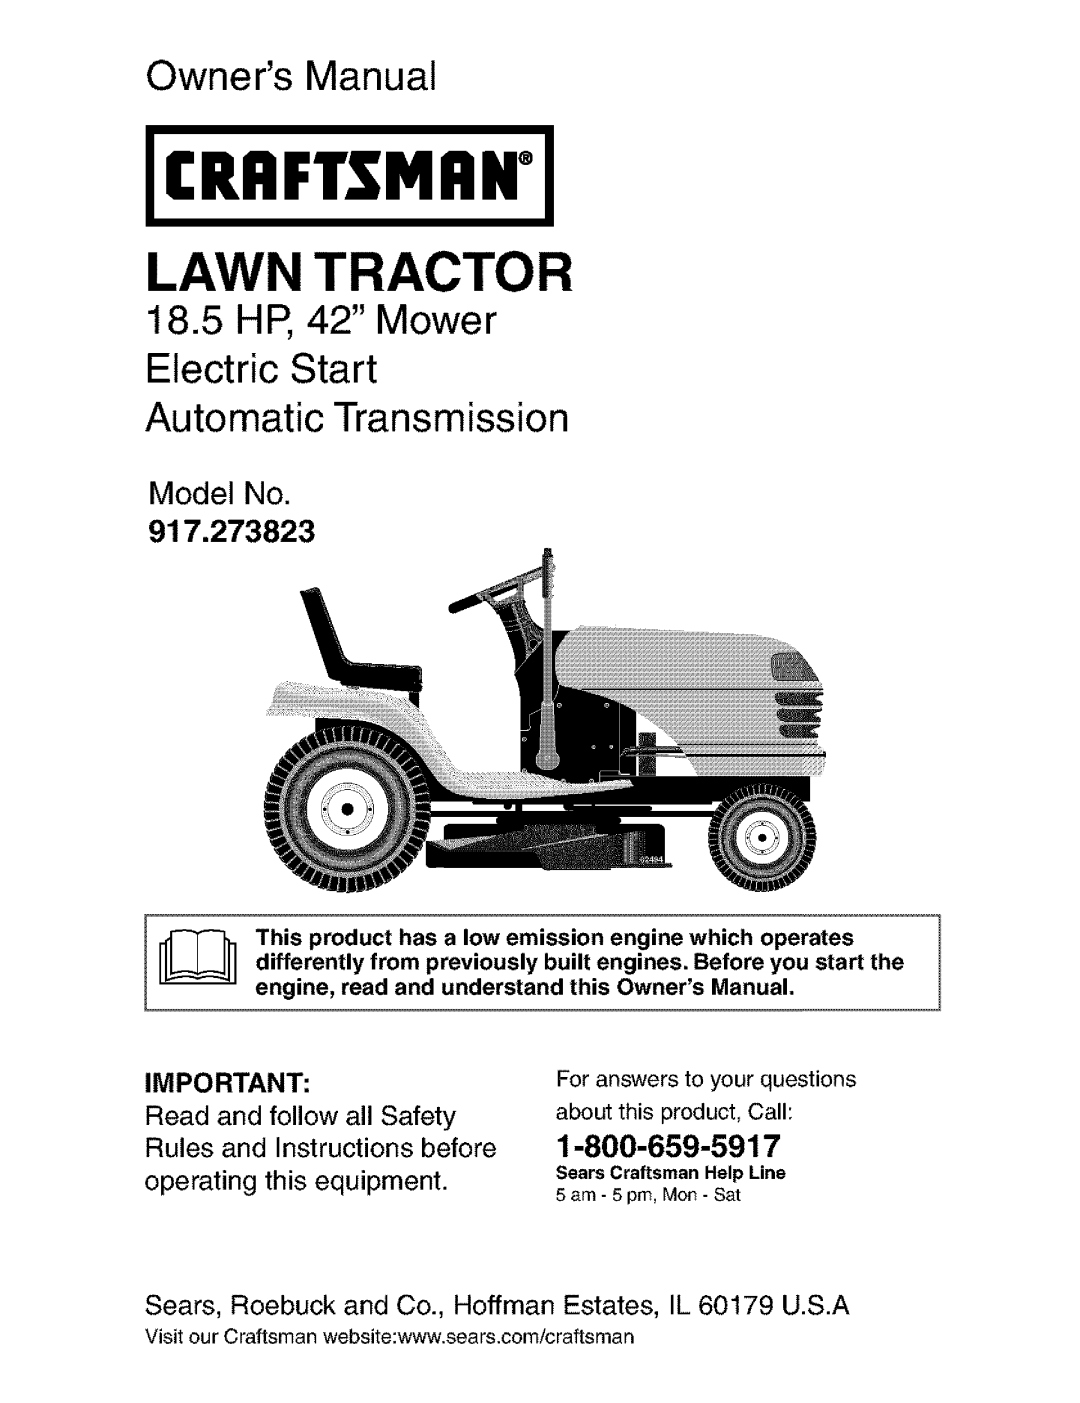 Craftsman 917.273823 owner manual Model No, Read and follow all Safety, Rules and, Instructions before, operating 